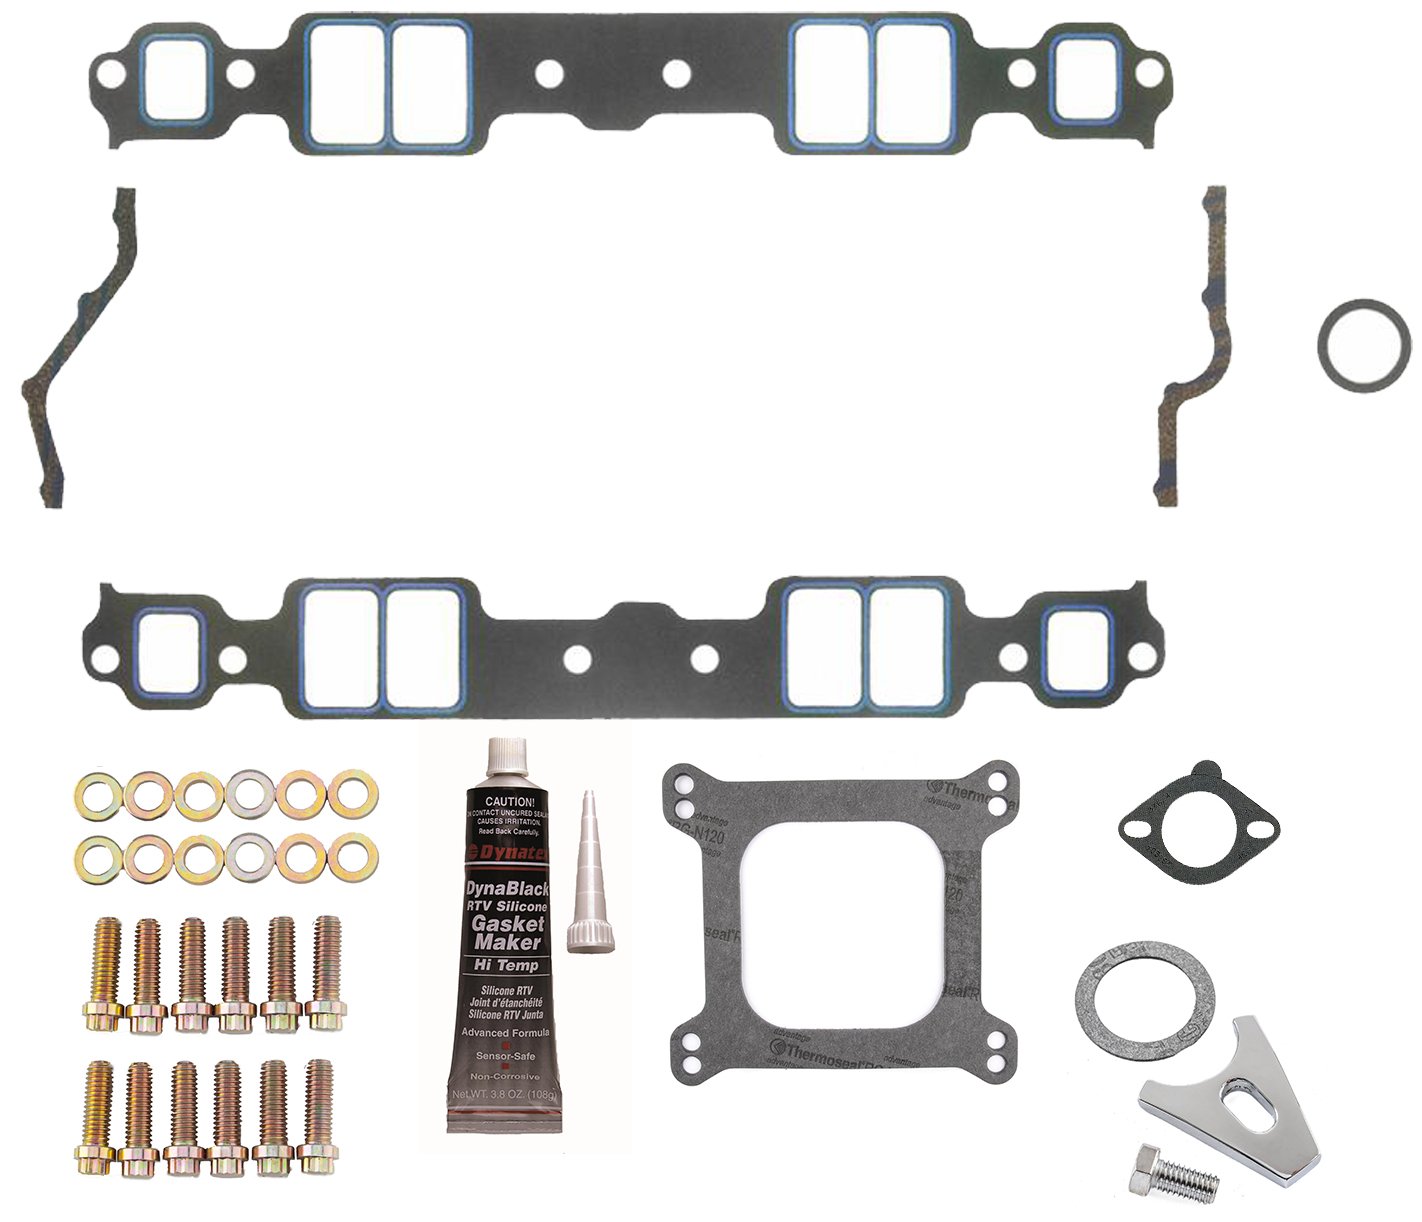 H/P Intake Gasket Install Kit - Small Block Chevy 262-400 V8 Engines - Stock or Small Race Port